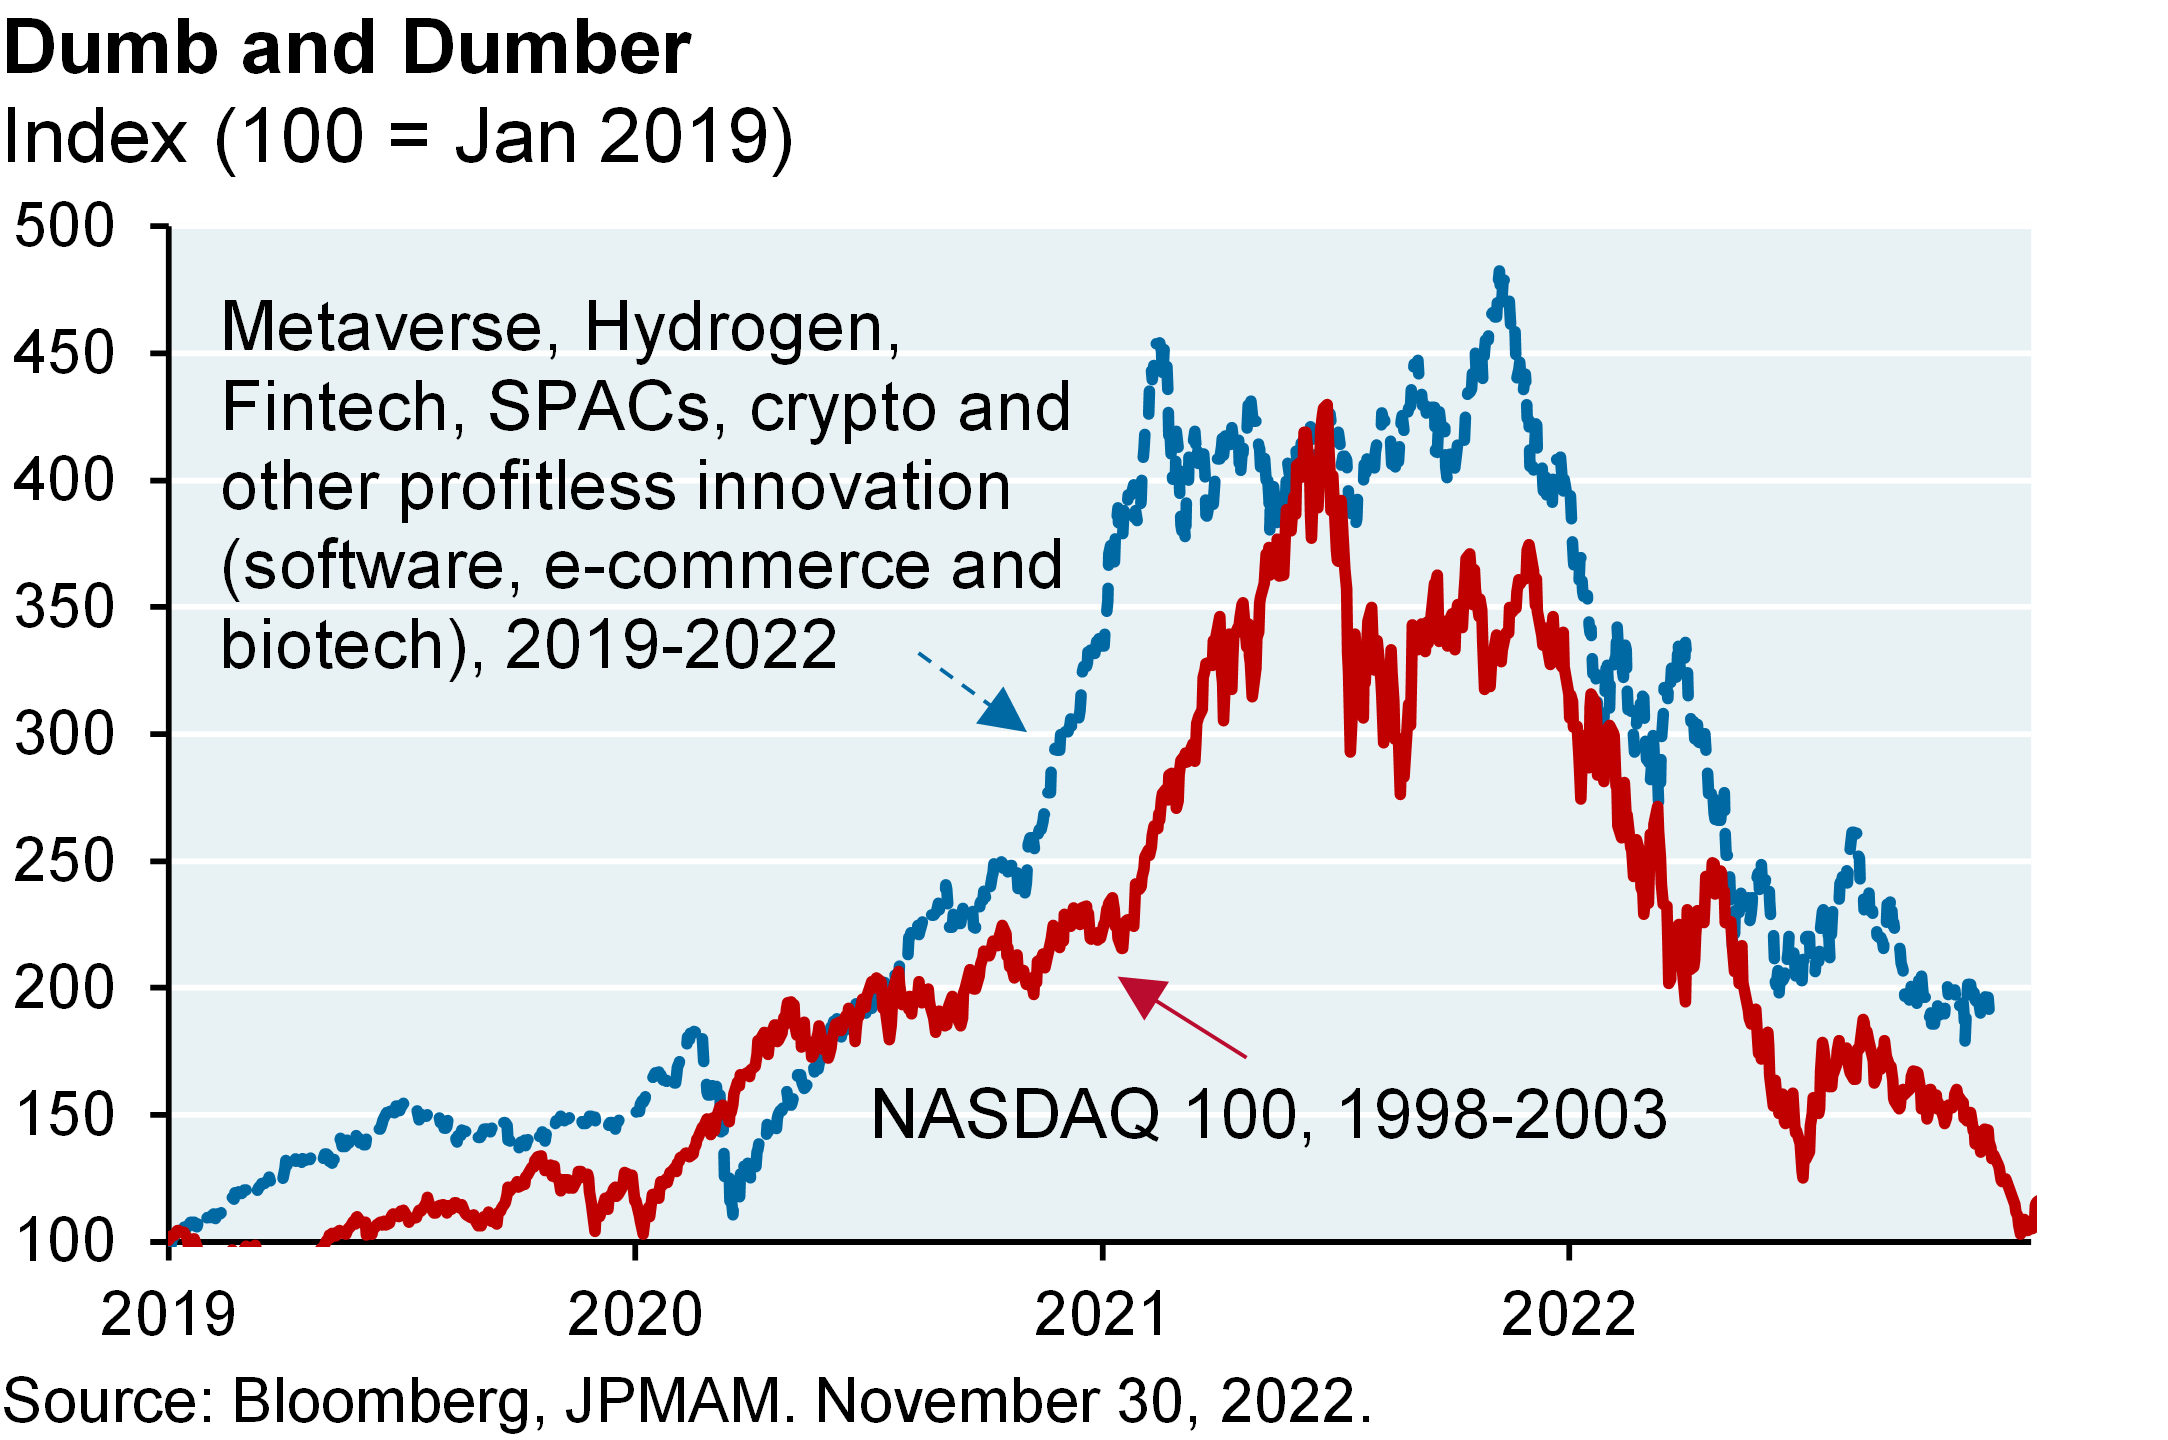 Line chart shows the performance of metaverse, hydrogen, fintech, SPAC, crypto and other profitless innovation stocks vs the NASDAQ 100 from 2019 to November 2022. After rising to high index levels of between 400 and 500, both lines have come crashing down to around where they started